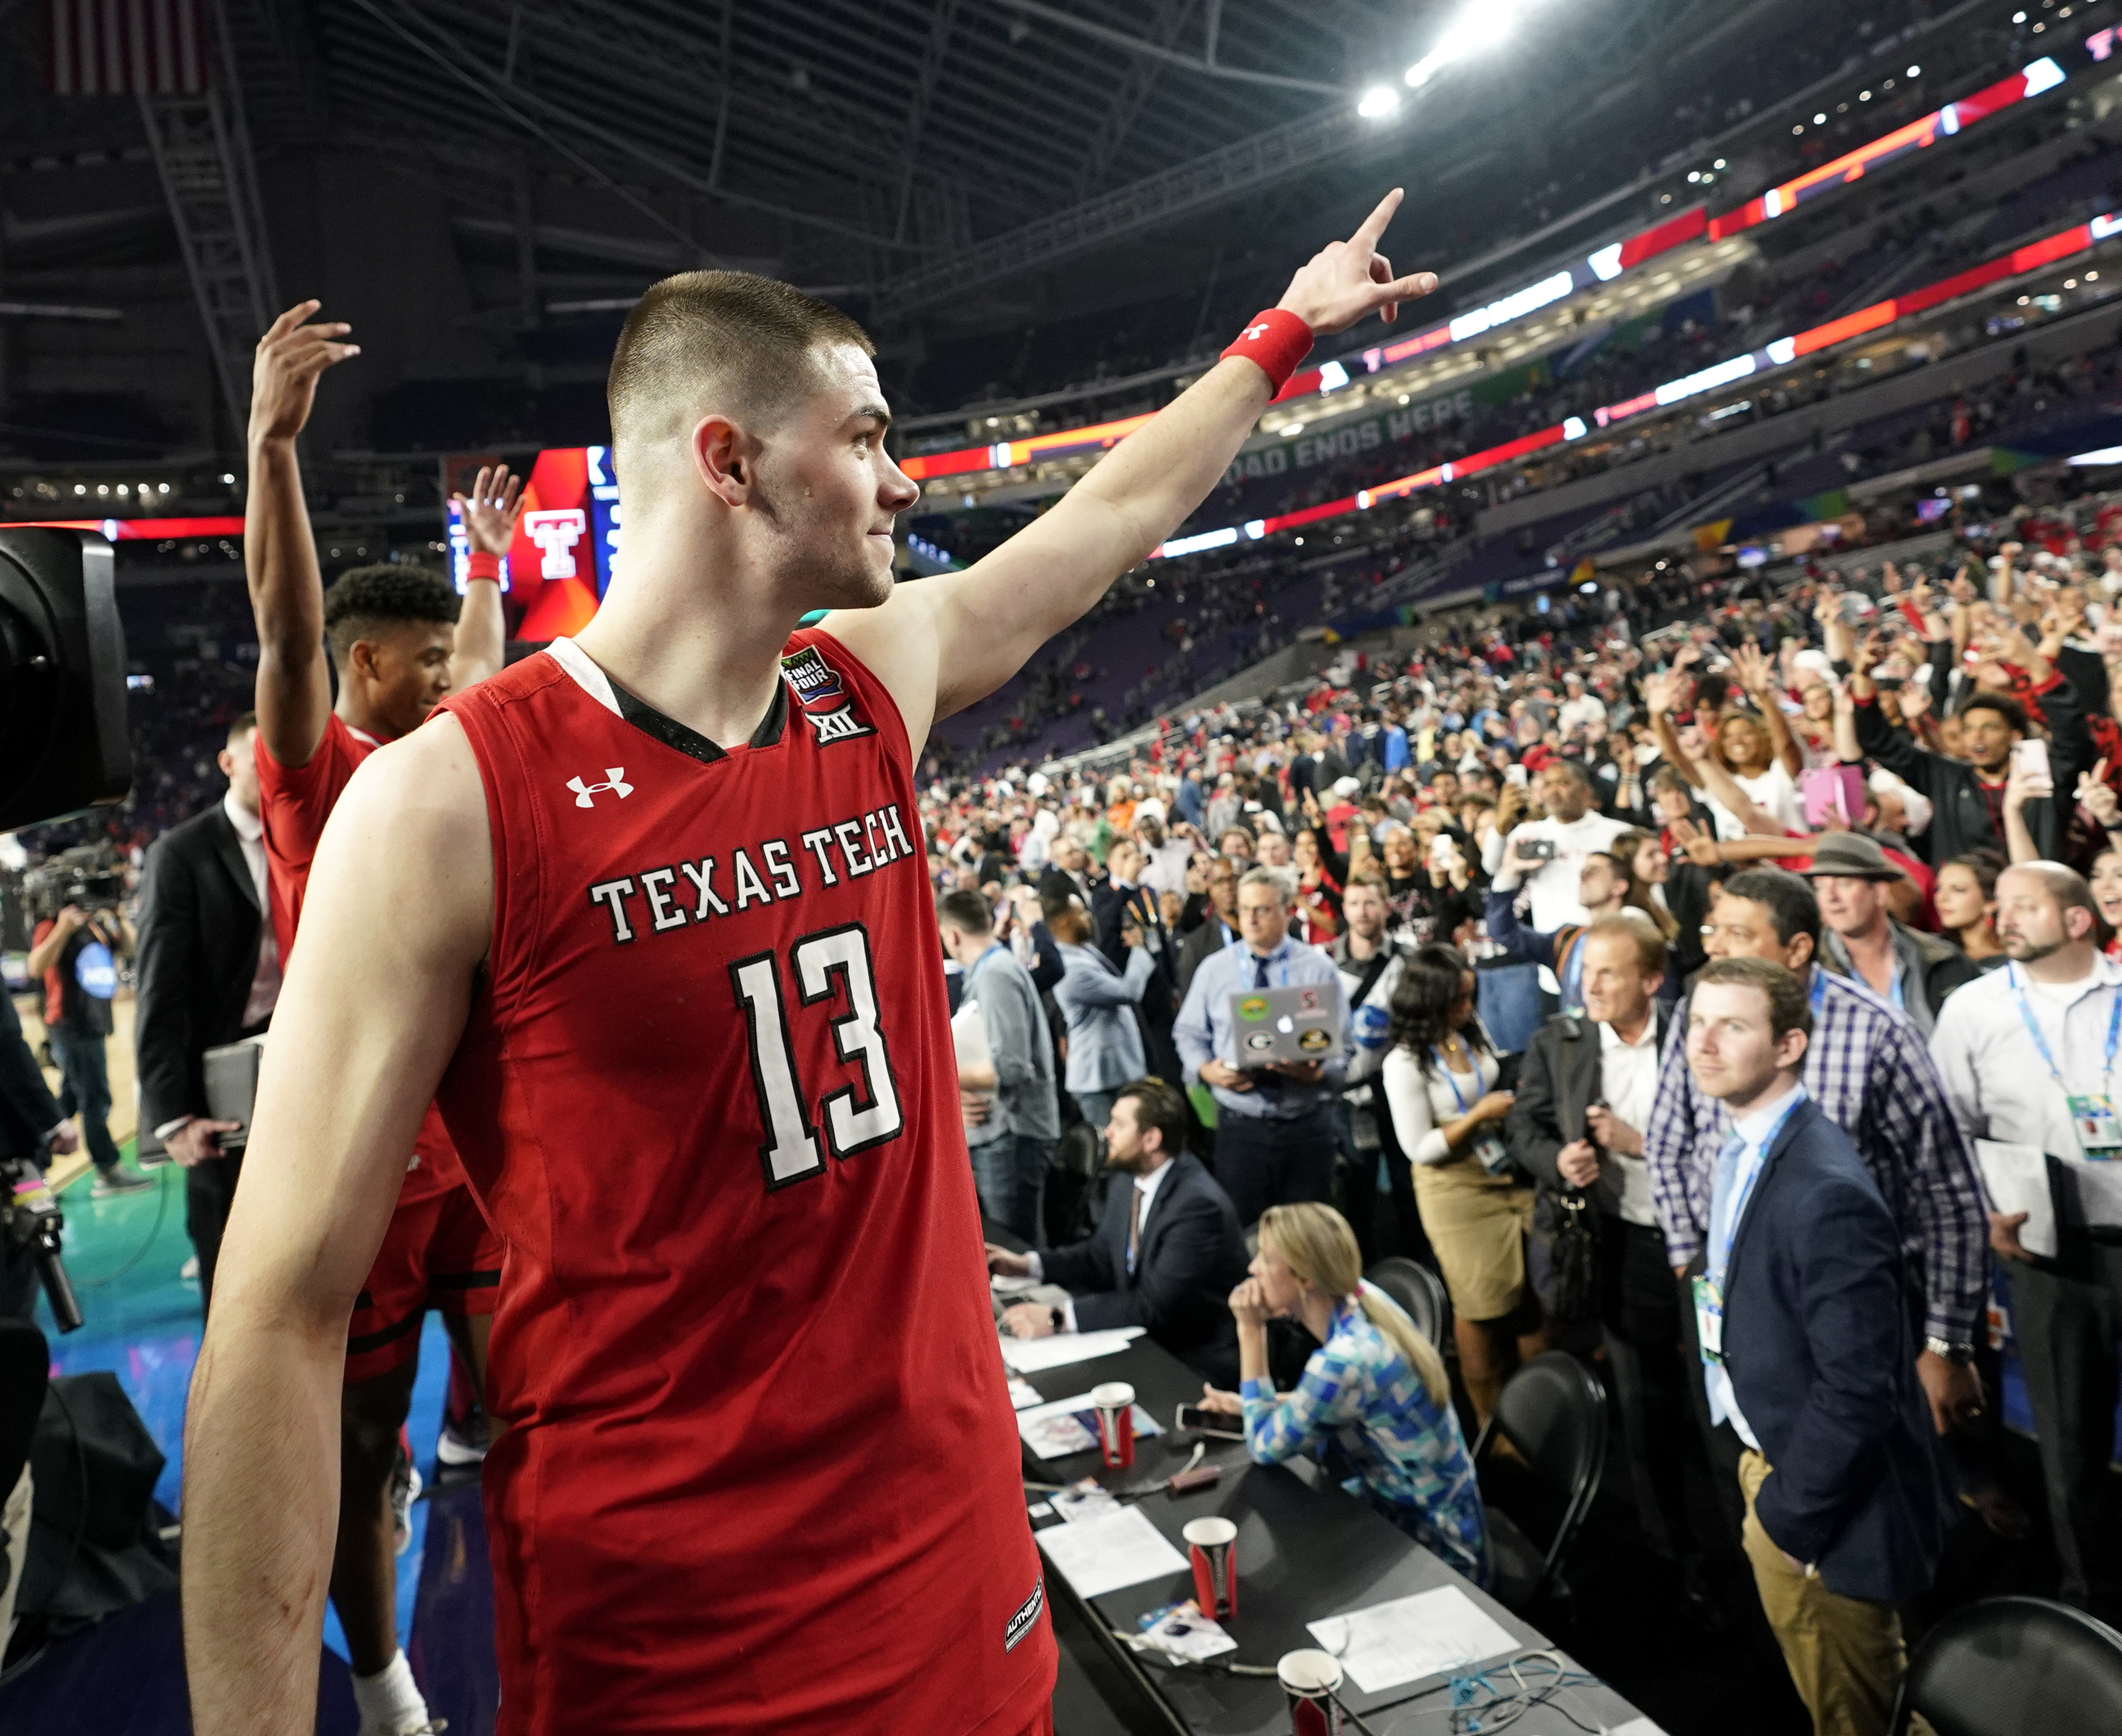 Matt Mooney’s college odyssey ends with Tech in title game